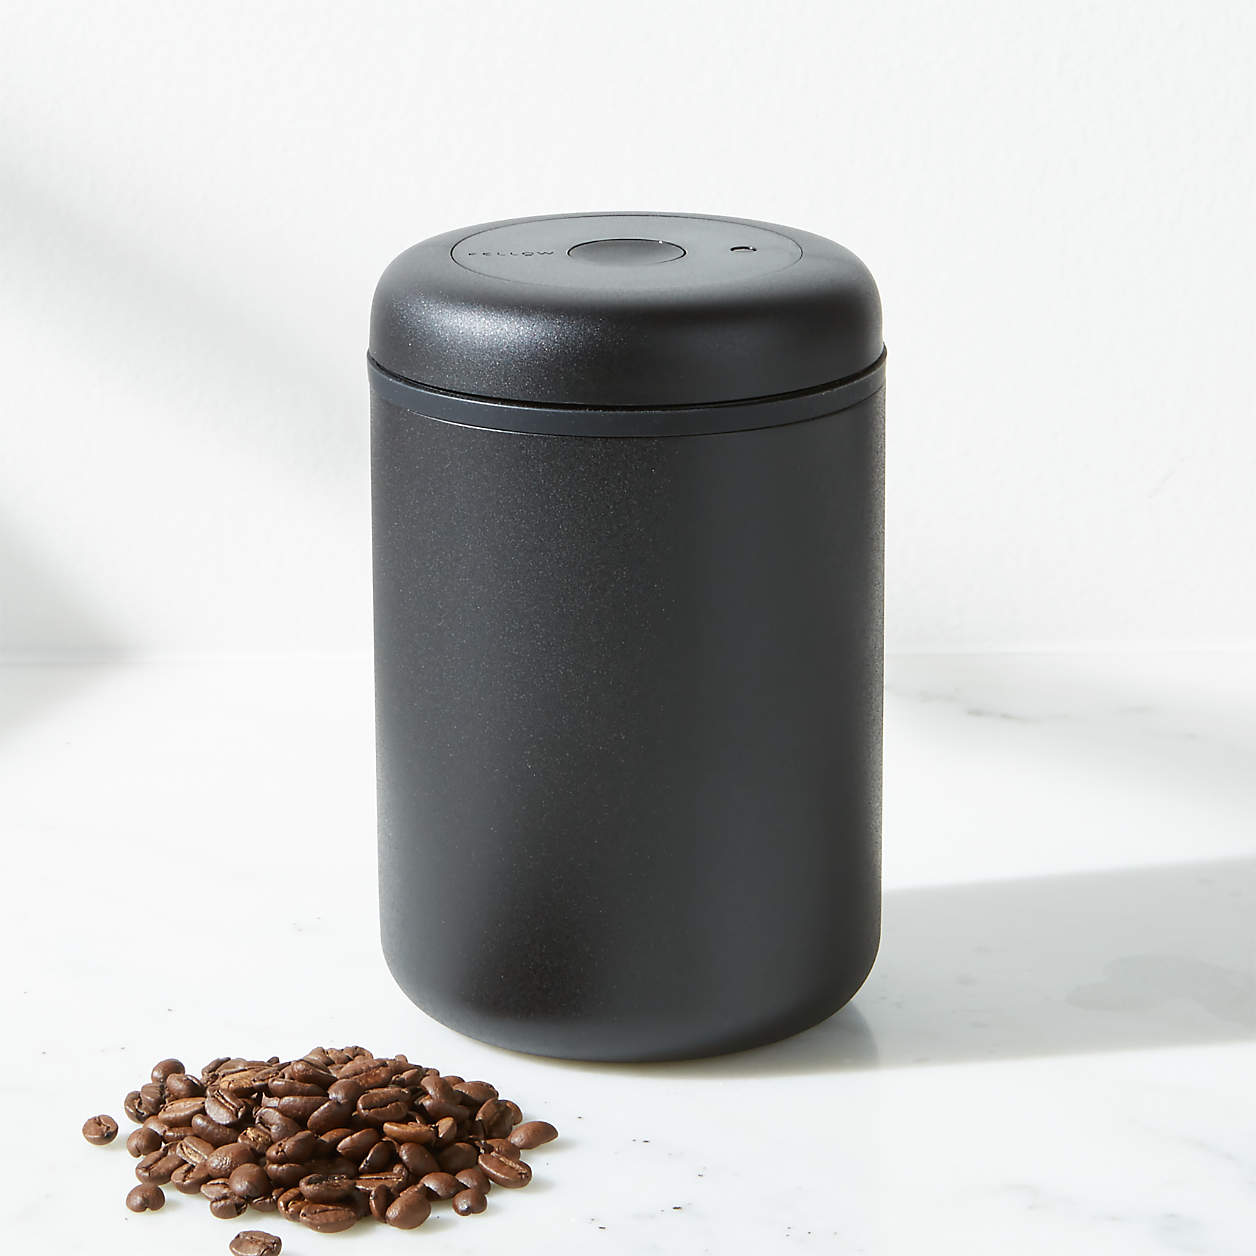 Small scoop of coffee beans and a Fellow Atmos Vacuum Canister 1.2L in Matte Black